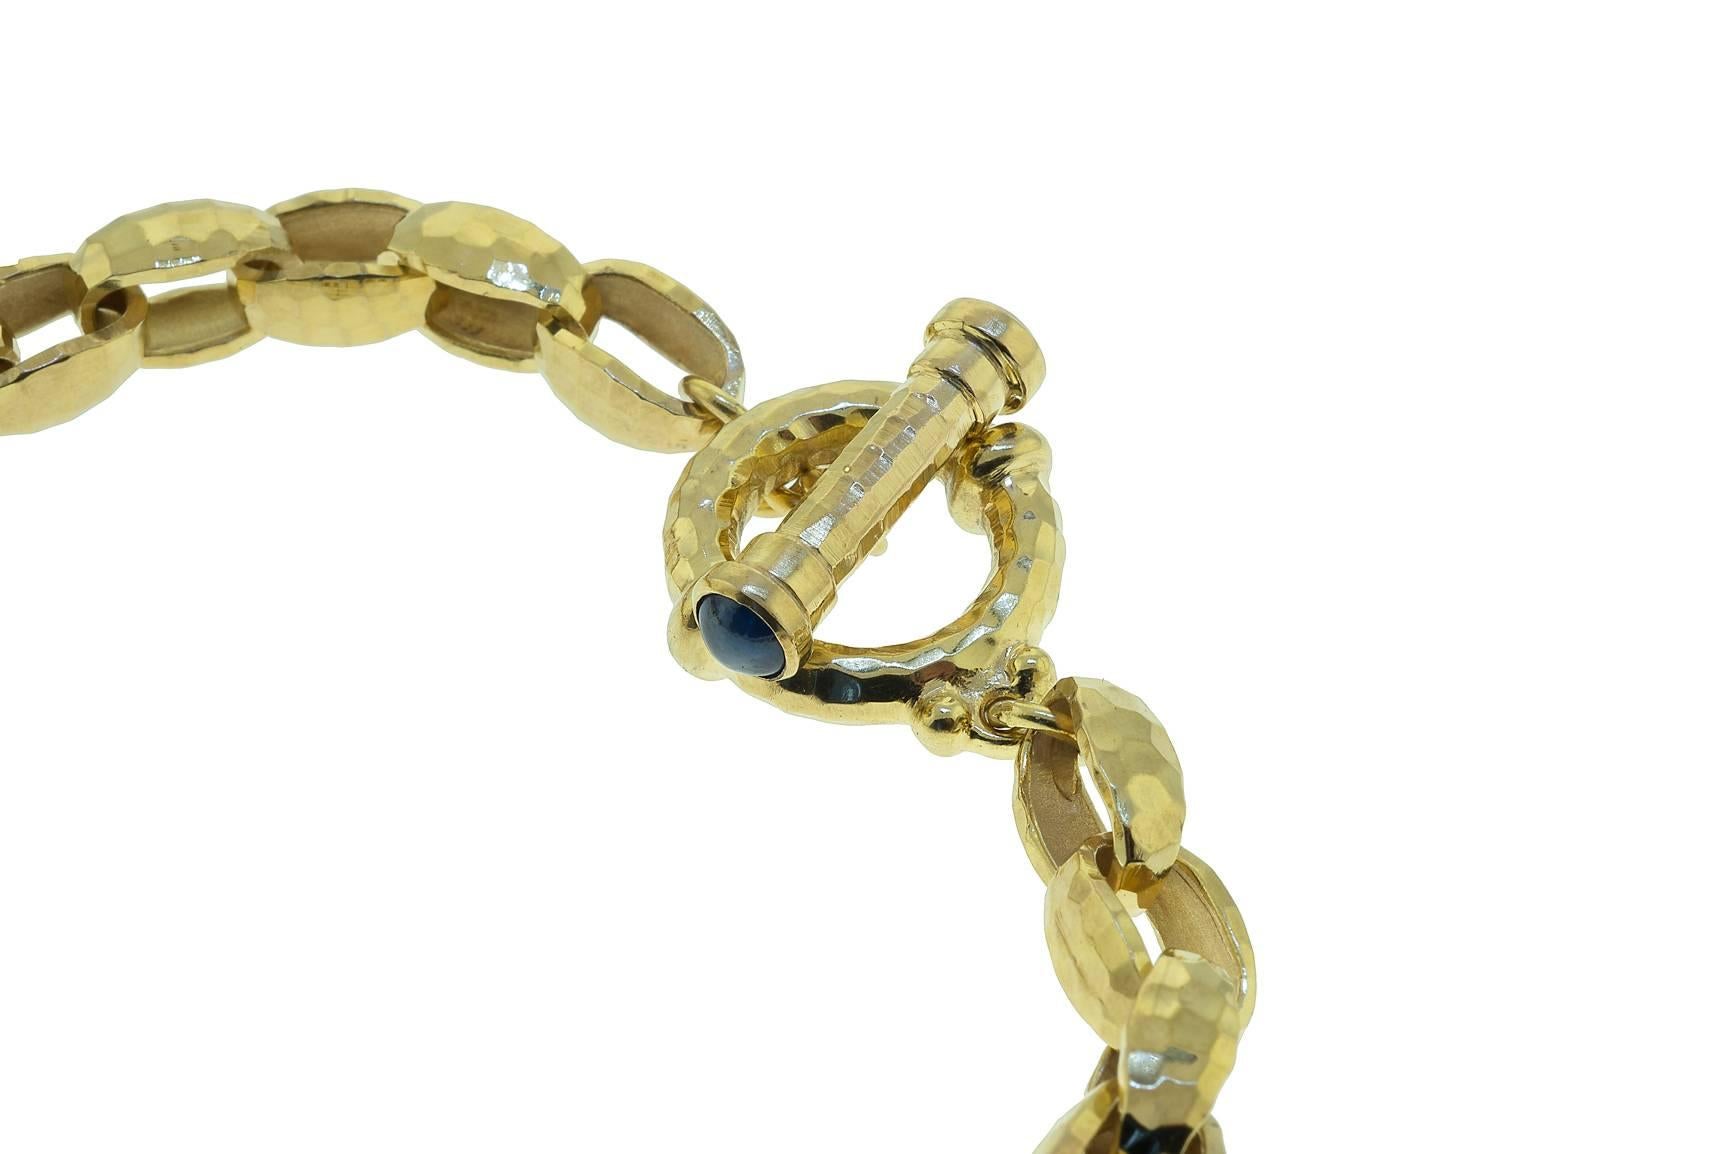 14K yellow gold oval link toggle bracelet. The links are oval and have a hammered finish. The toggle has sapphire cabochon on each end.
